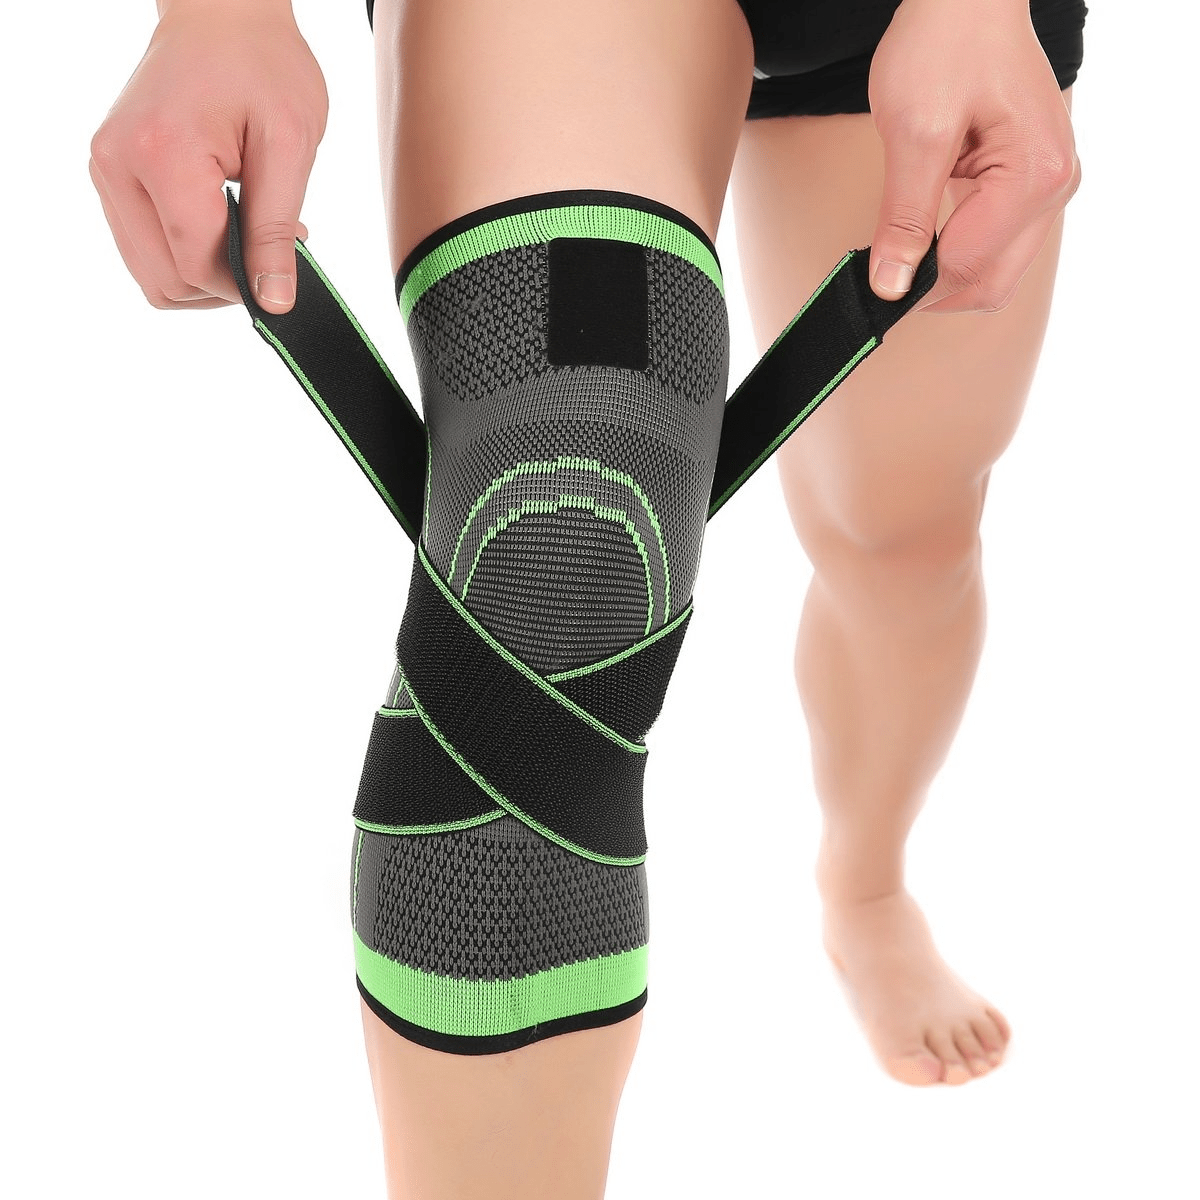 order a size up 1pc knee sleeve knee compression pads for improving circulation knee pain relief for men women knee support arthritis relief running cycling adjustable strap wrap exercise equipment s